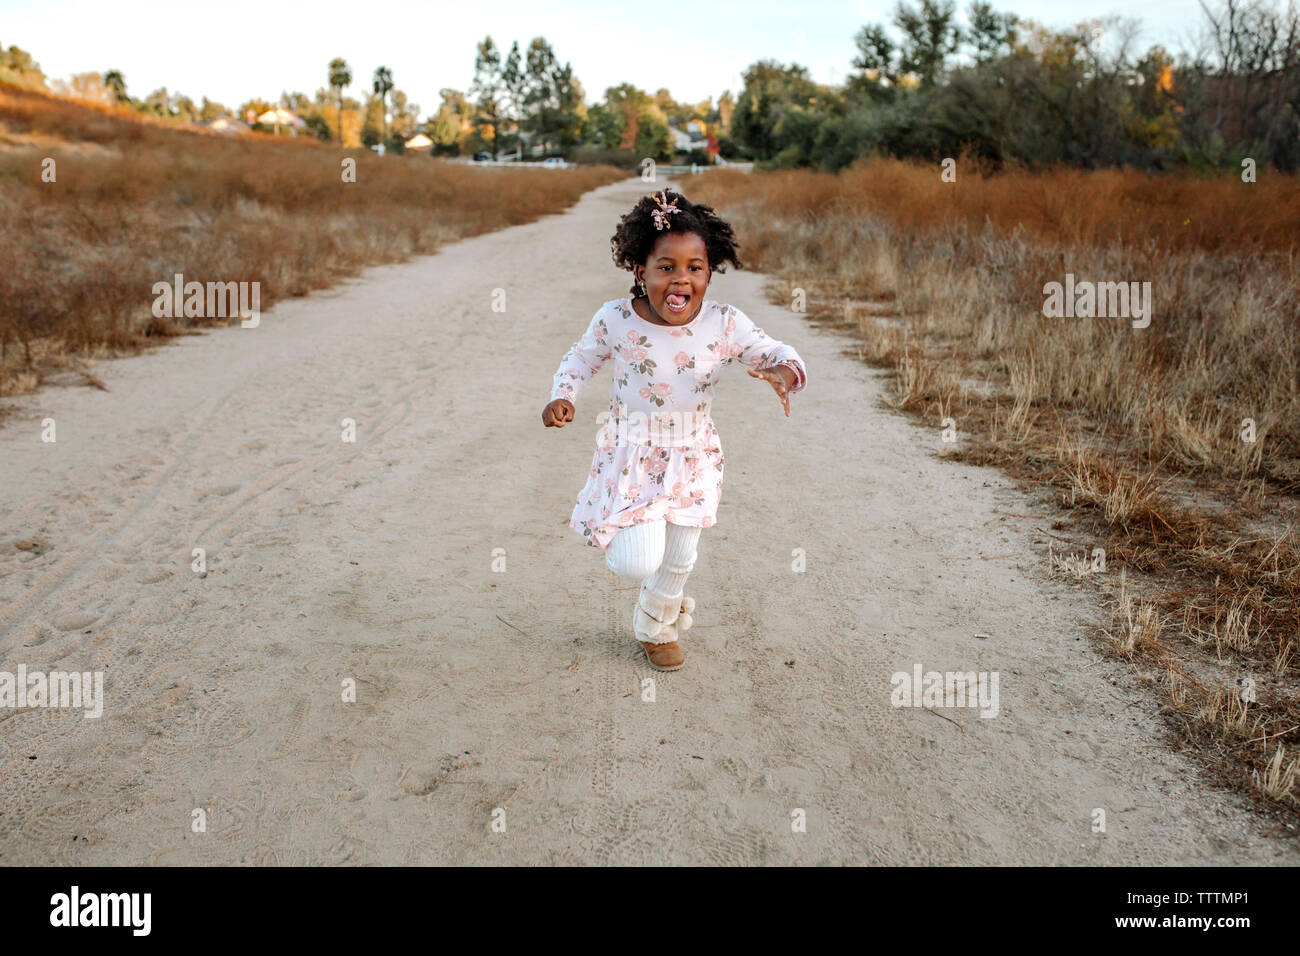 Playful girl running on dirt road in forest Banque D'Images